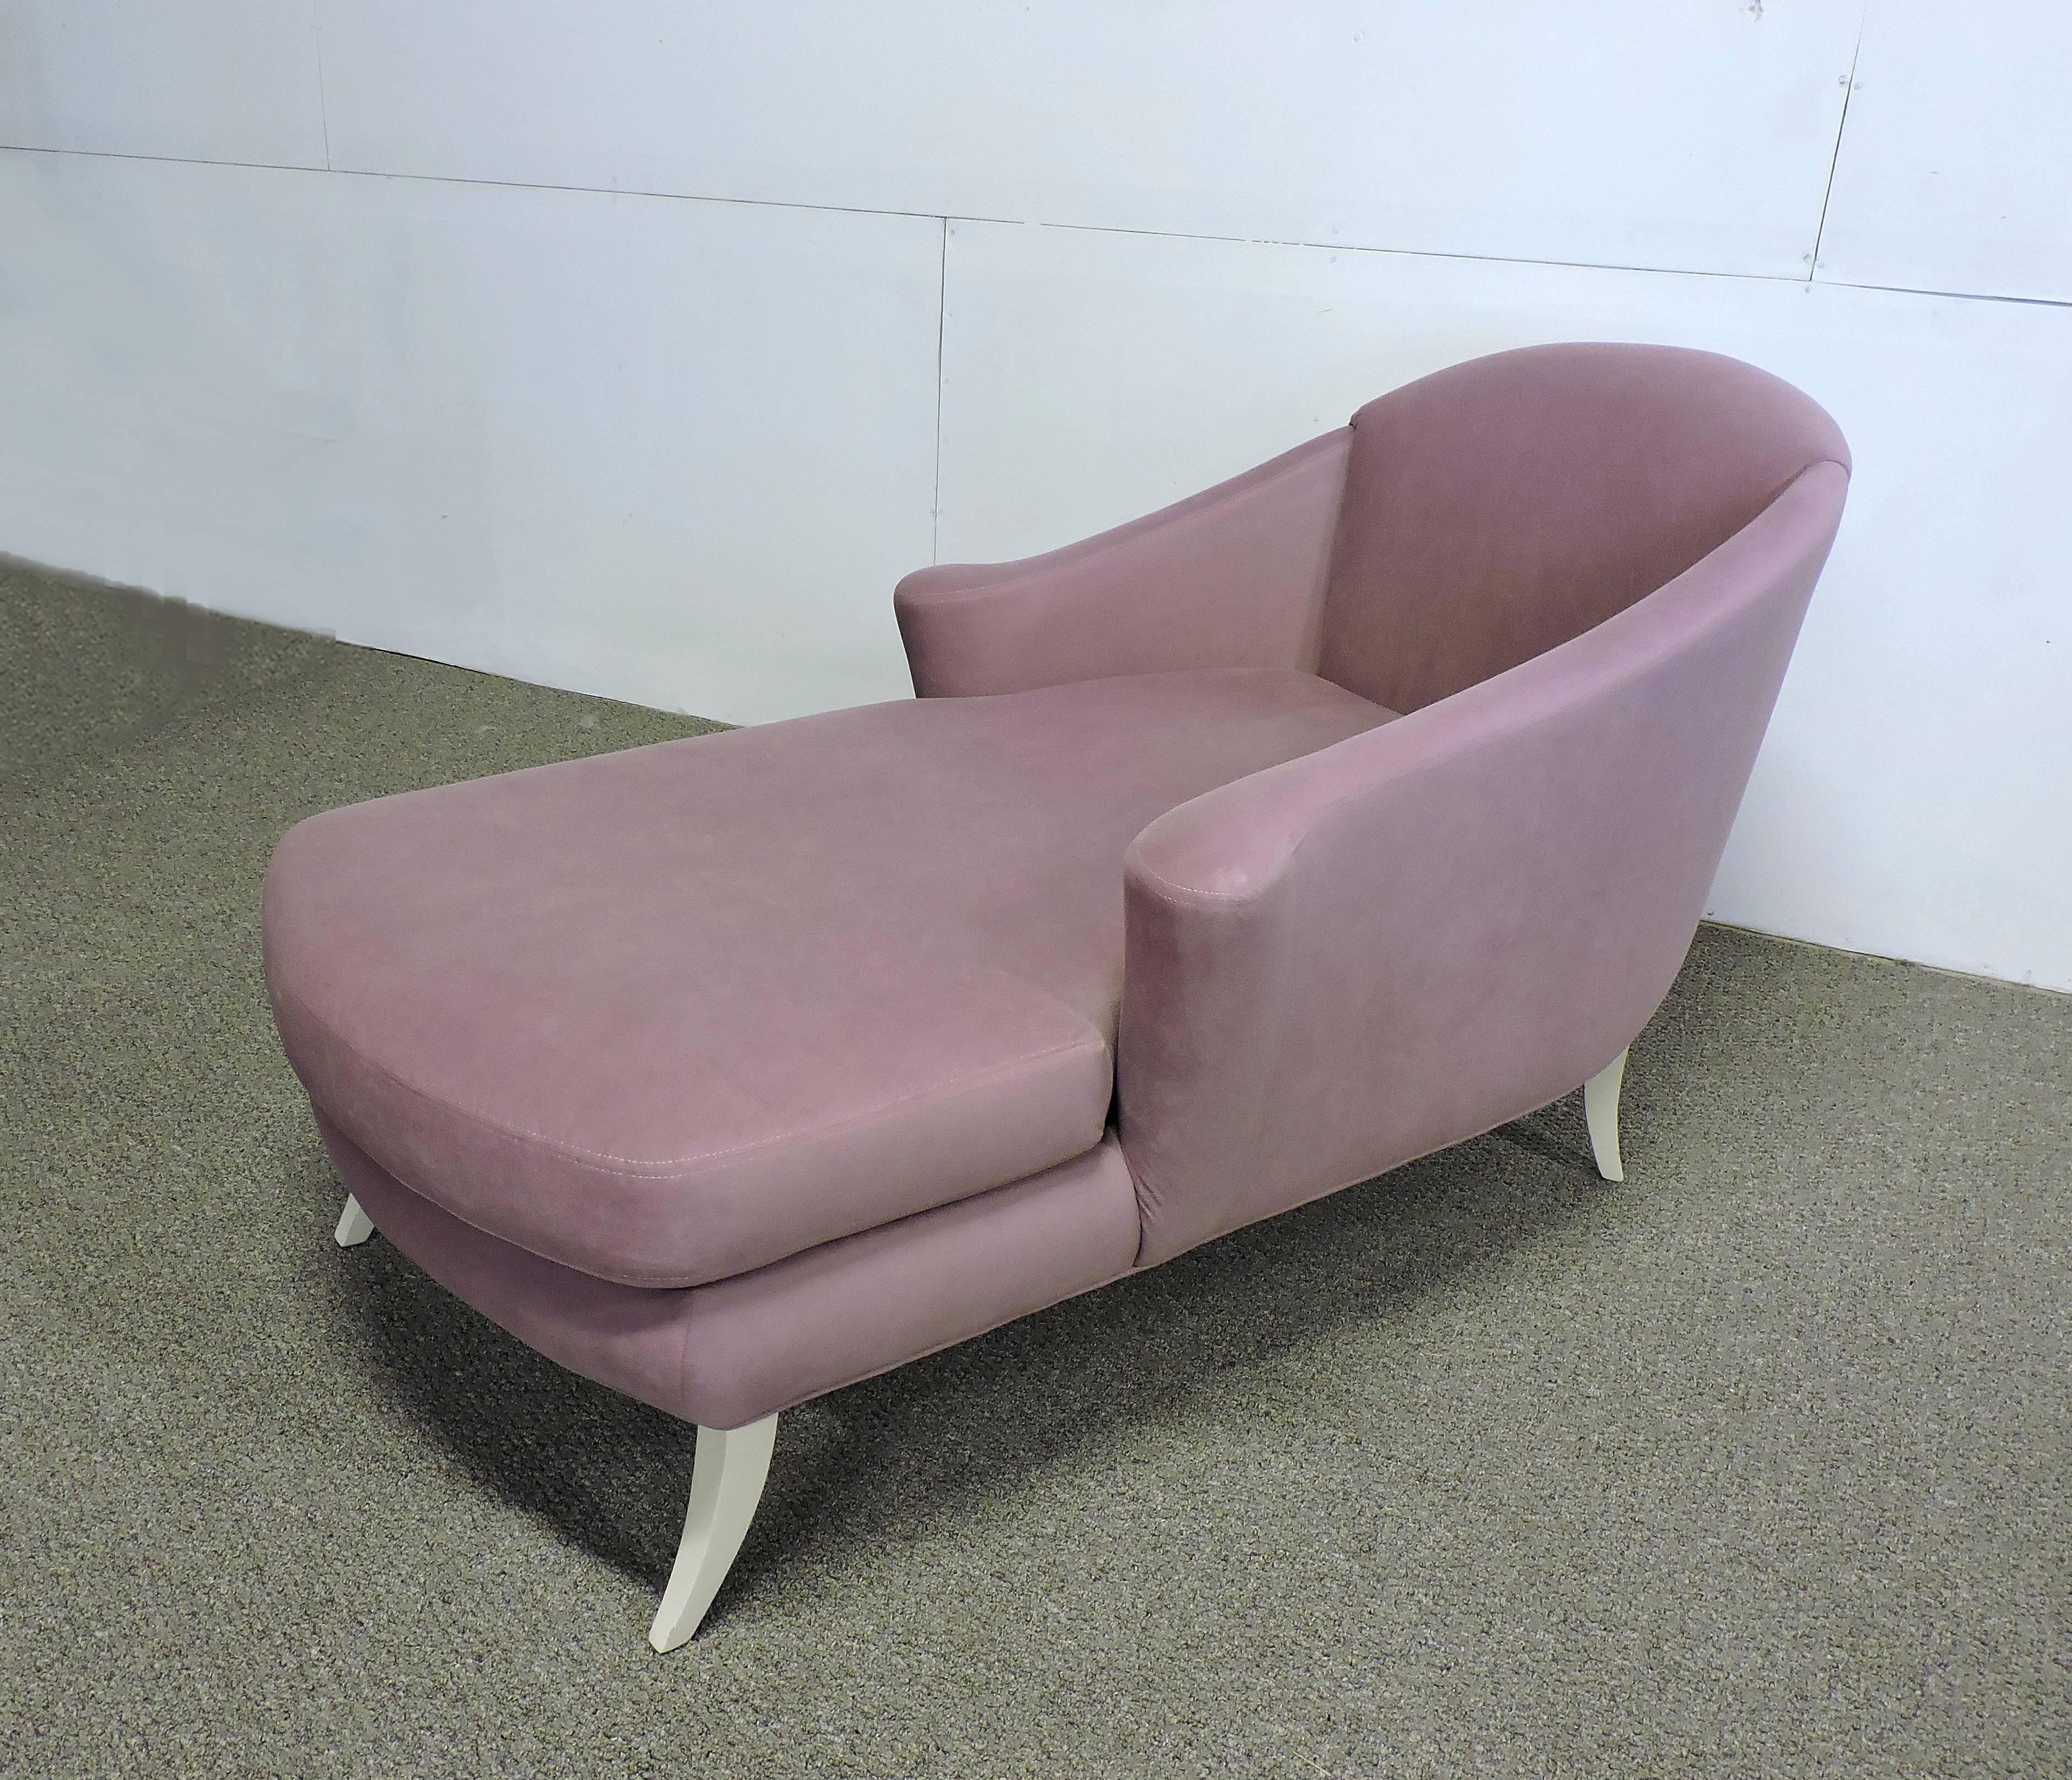 Lovely chaise longue made by high quality furniture manufacturer, Thayer Coggin. This chaise has beautiful curves with white lacquered saber feet and is upholstered in a lilac colored microsuede fabric.